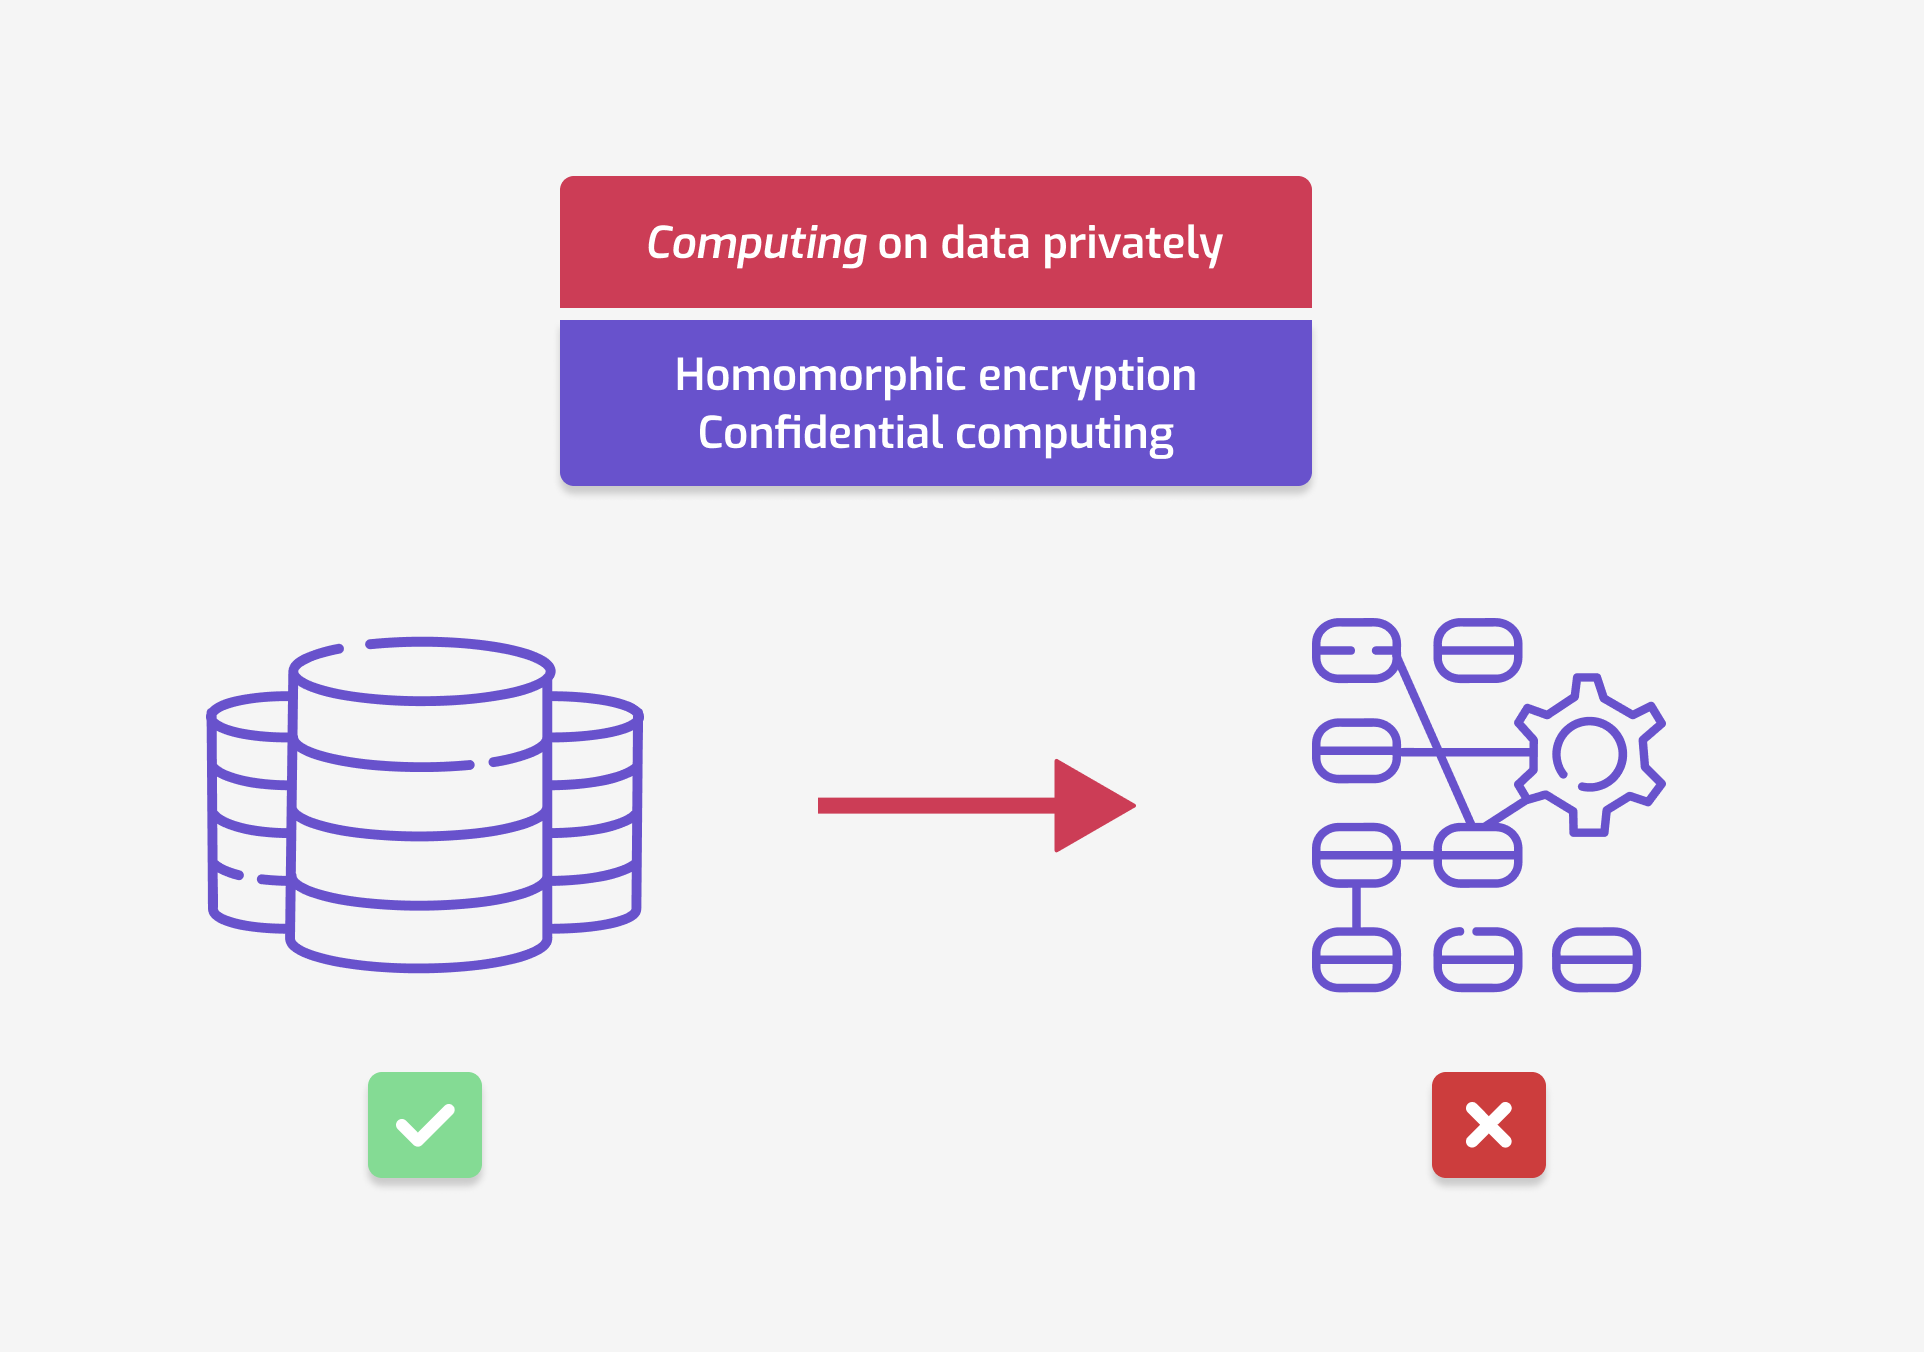 A diagram representing private data computation. A database icon is on the
left, and an arrow goes from it to an icon representing a computation, on the
right. A green check mark is under the database icon, and a "forbidden" sign is
below the computation sign. The diagram is labeled "Computing on data privately:
homomorphix encryption, confidential
computing".